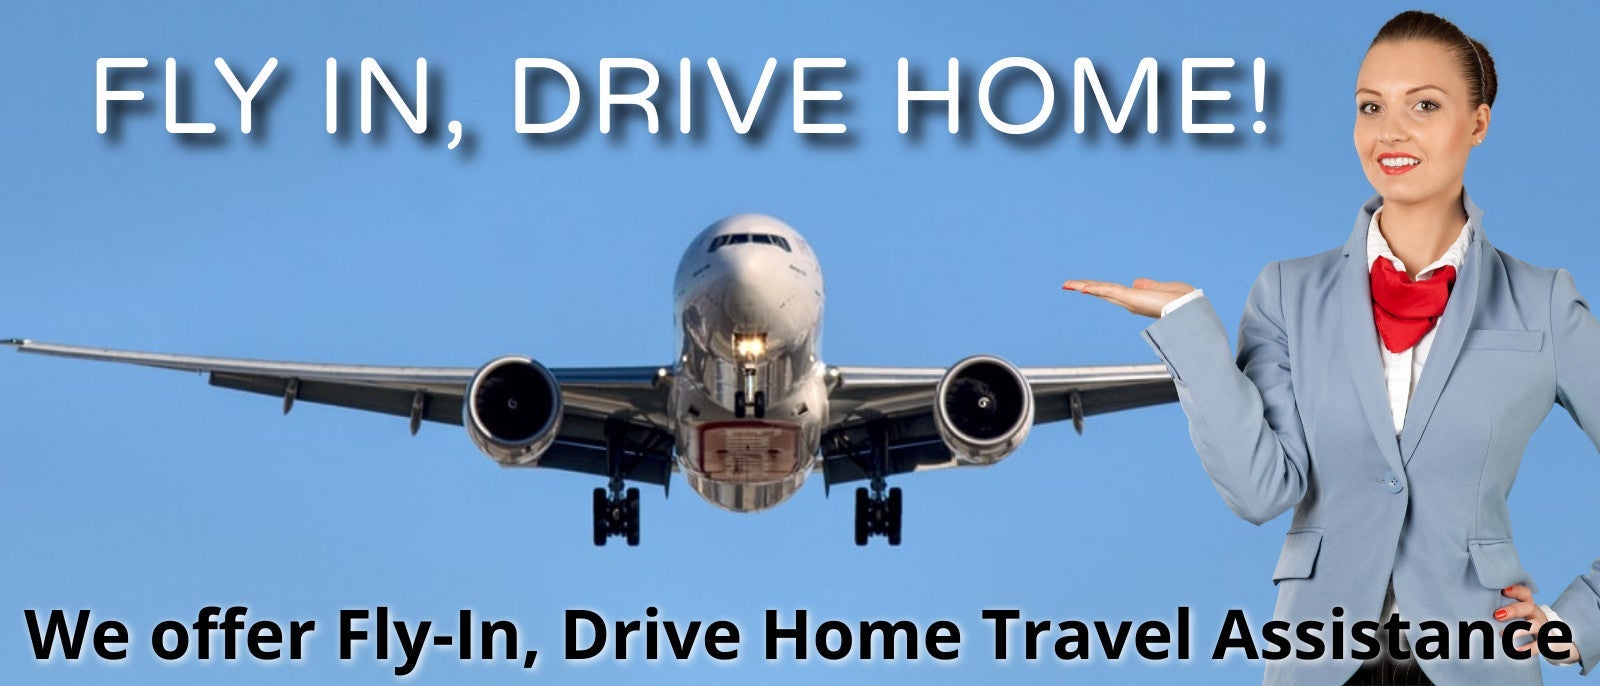 FLY IN, DRIVE HOME! We offer Fly-In, Drive Home Travel Assistance.